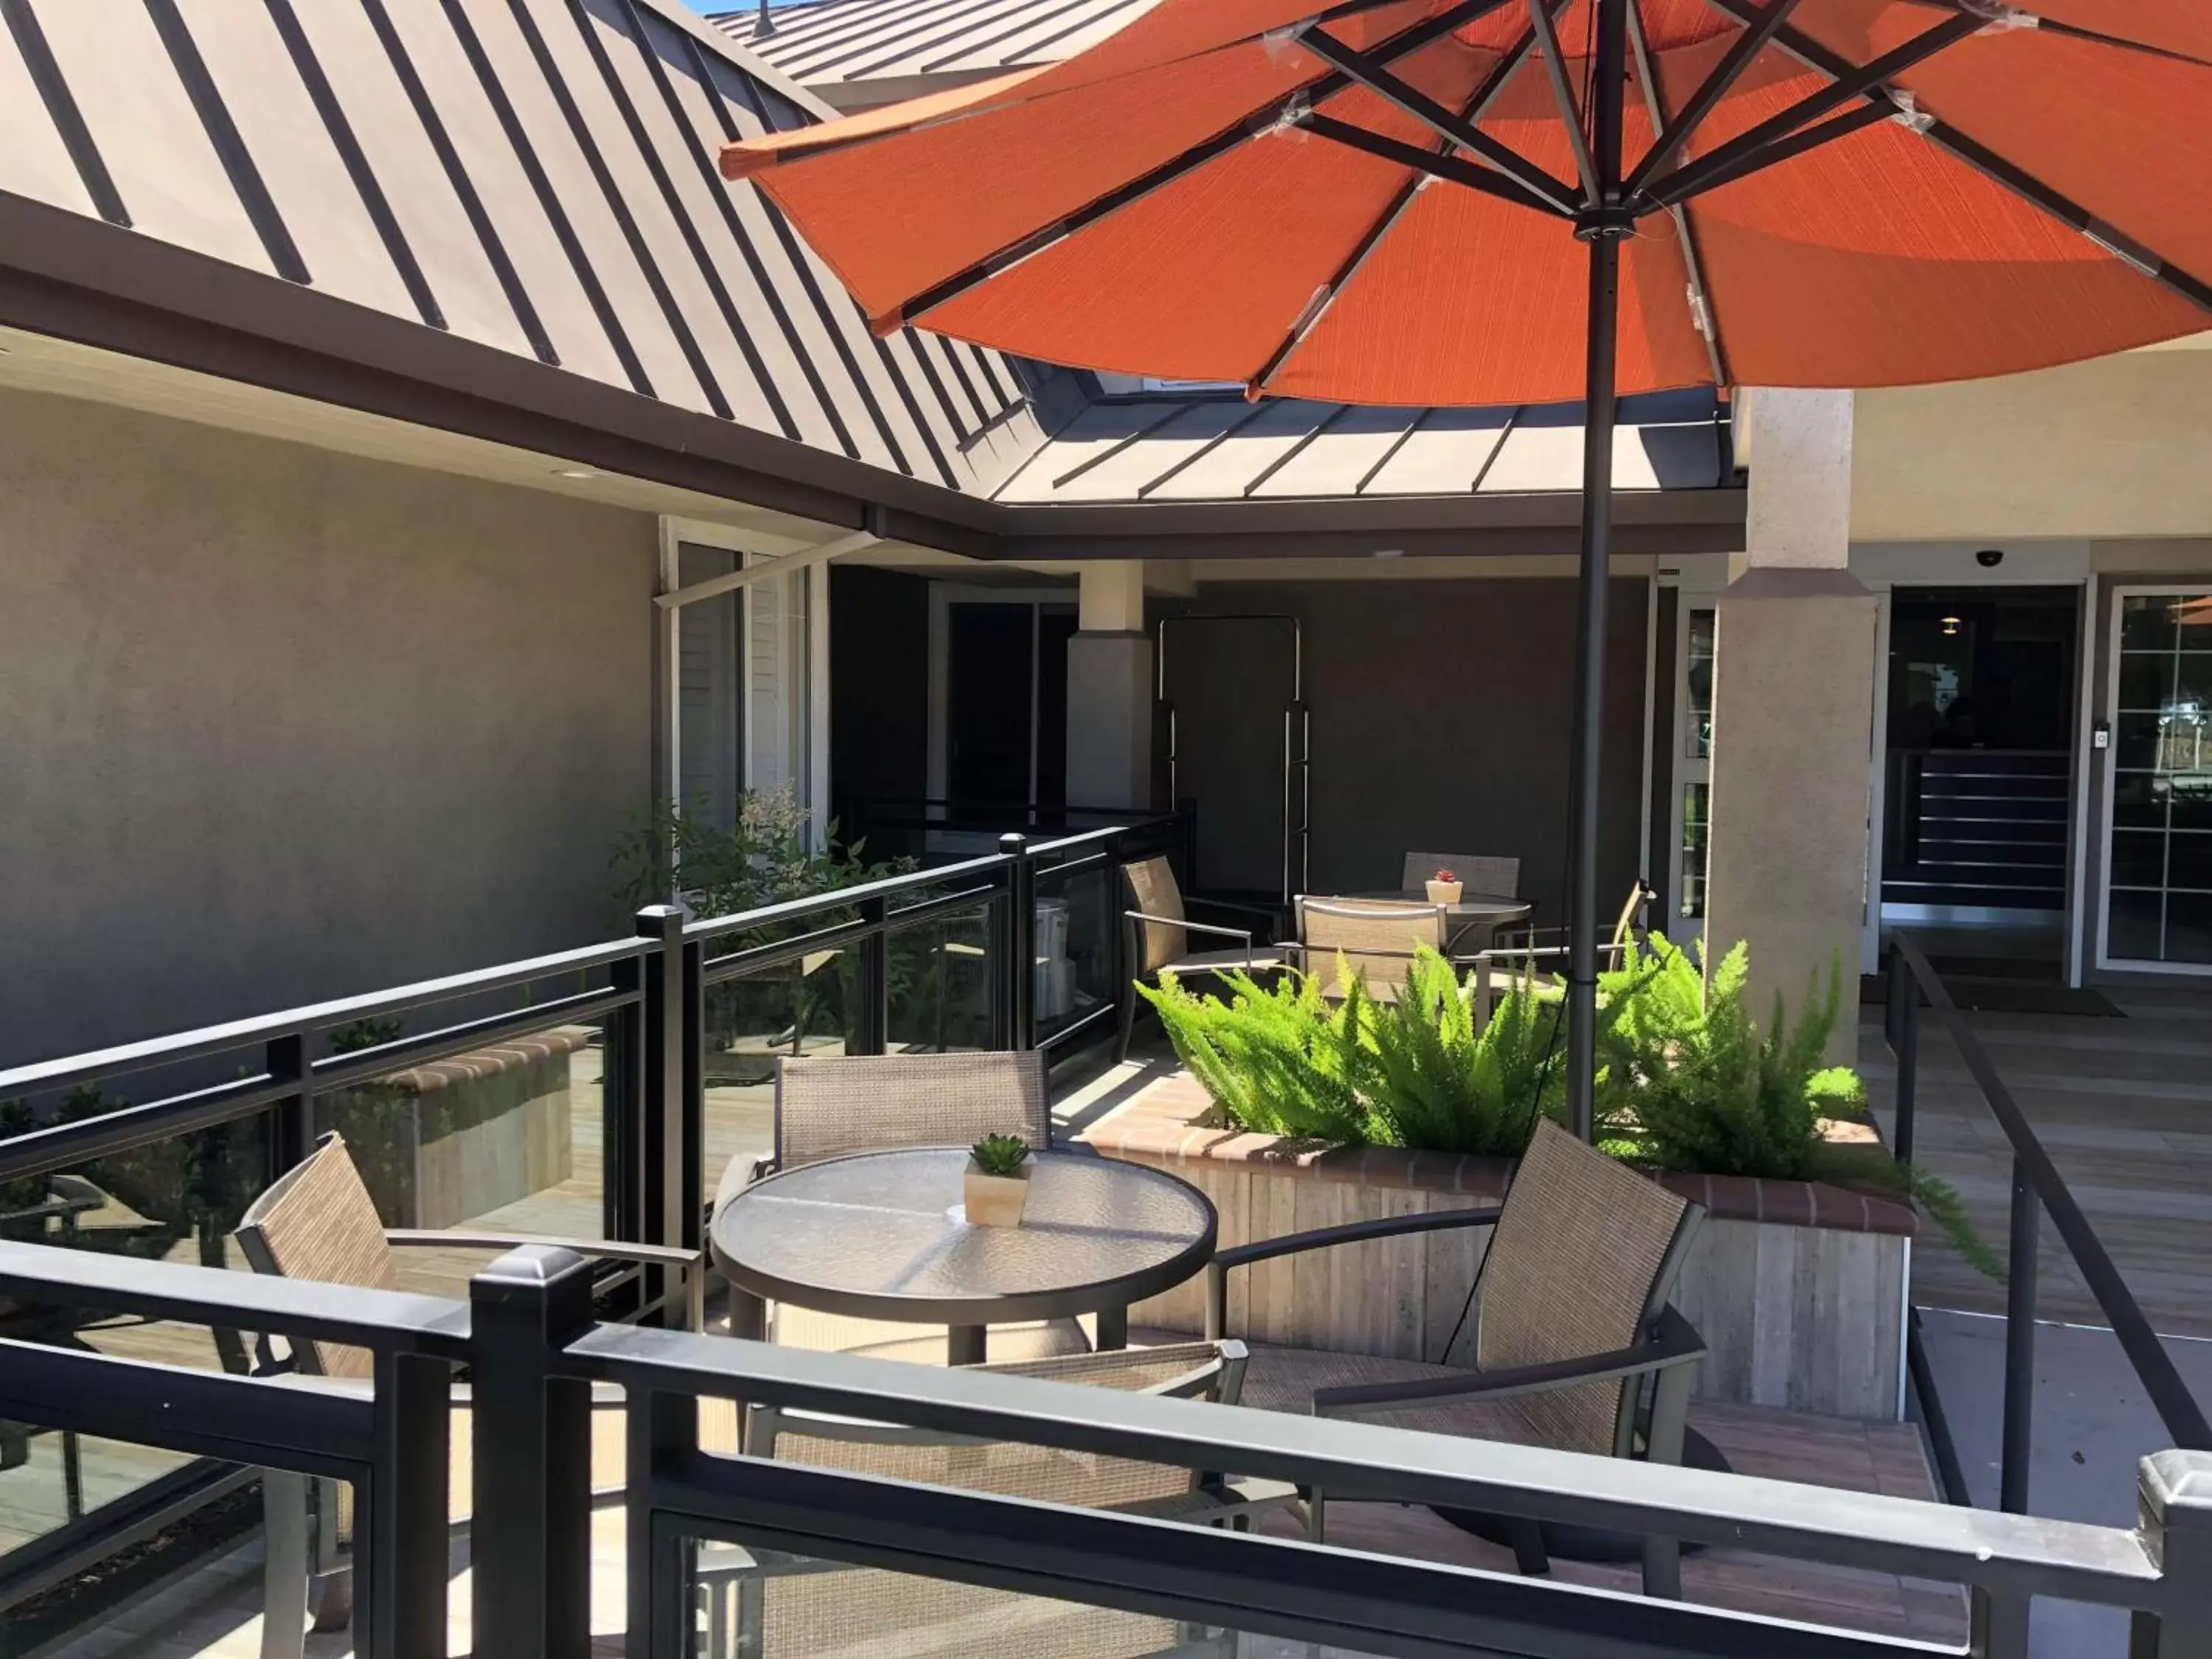 Property building in Best Western Silicon Valley Inn